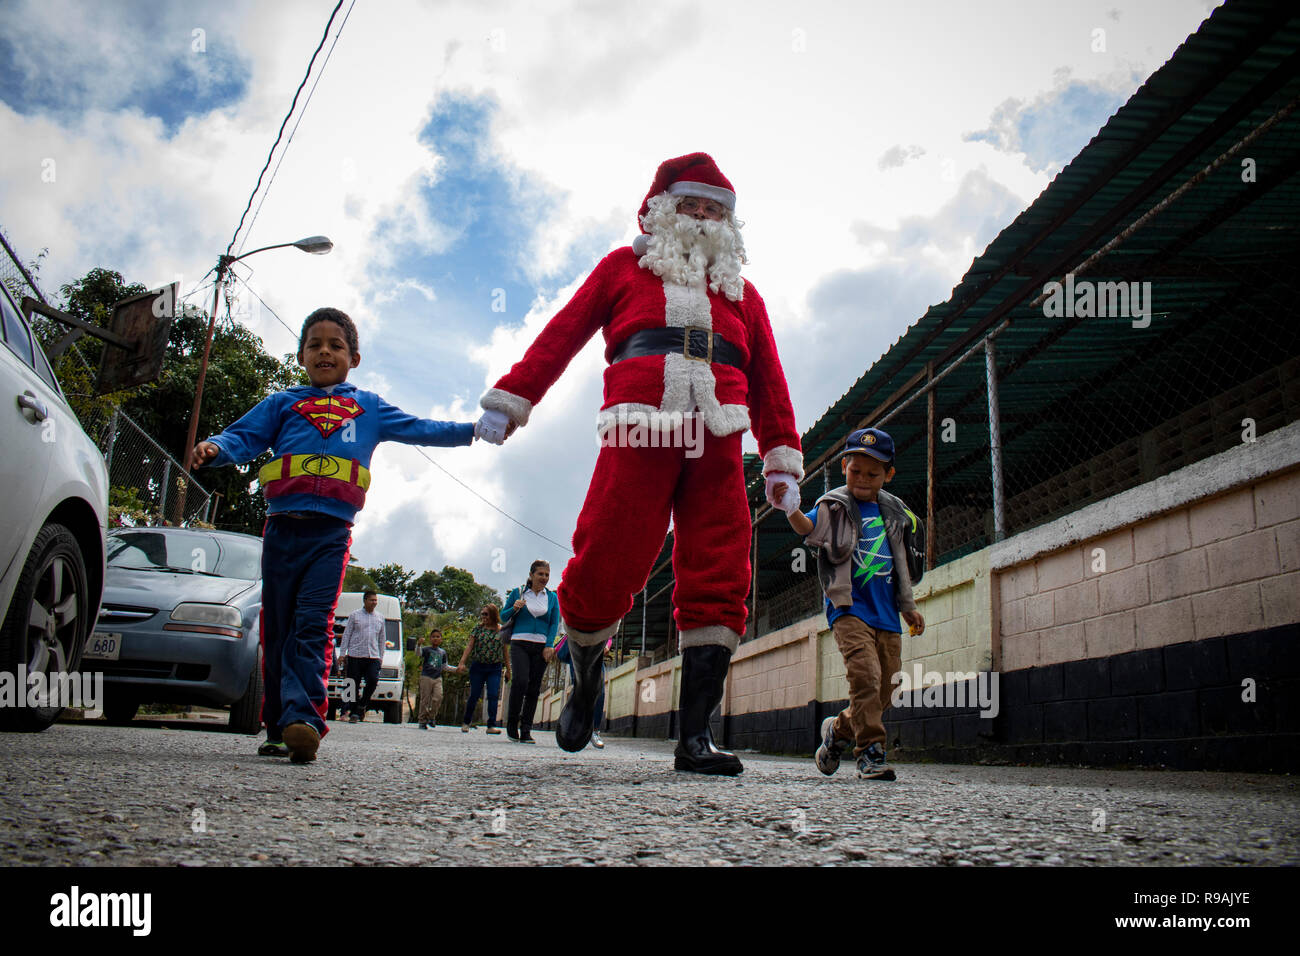 Caracas, Venezuela. 21st Dec, 2018. 'Santa Claus' comes to a congregation in the countryside east of Caracas and brings gifts to children through the initiative 'Un Juguete: Una Buena Noticia' (A Toy, a Good News). The initiative was founded by reporters and journalists in Venezuela. The group also provides school supplies for children from a poorer neighbourhood in Caracas. Credit: Rayner Pena/dpa/Alamy Live News Stock Photo